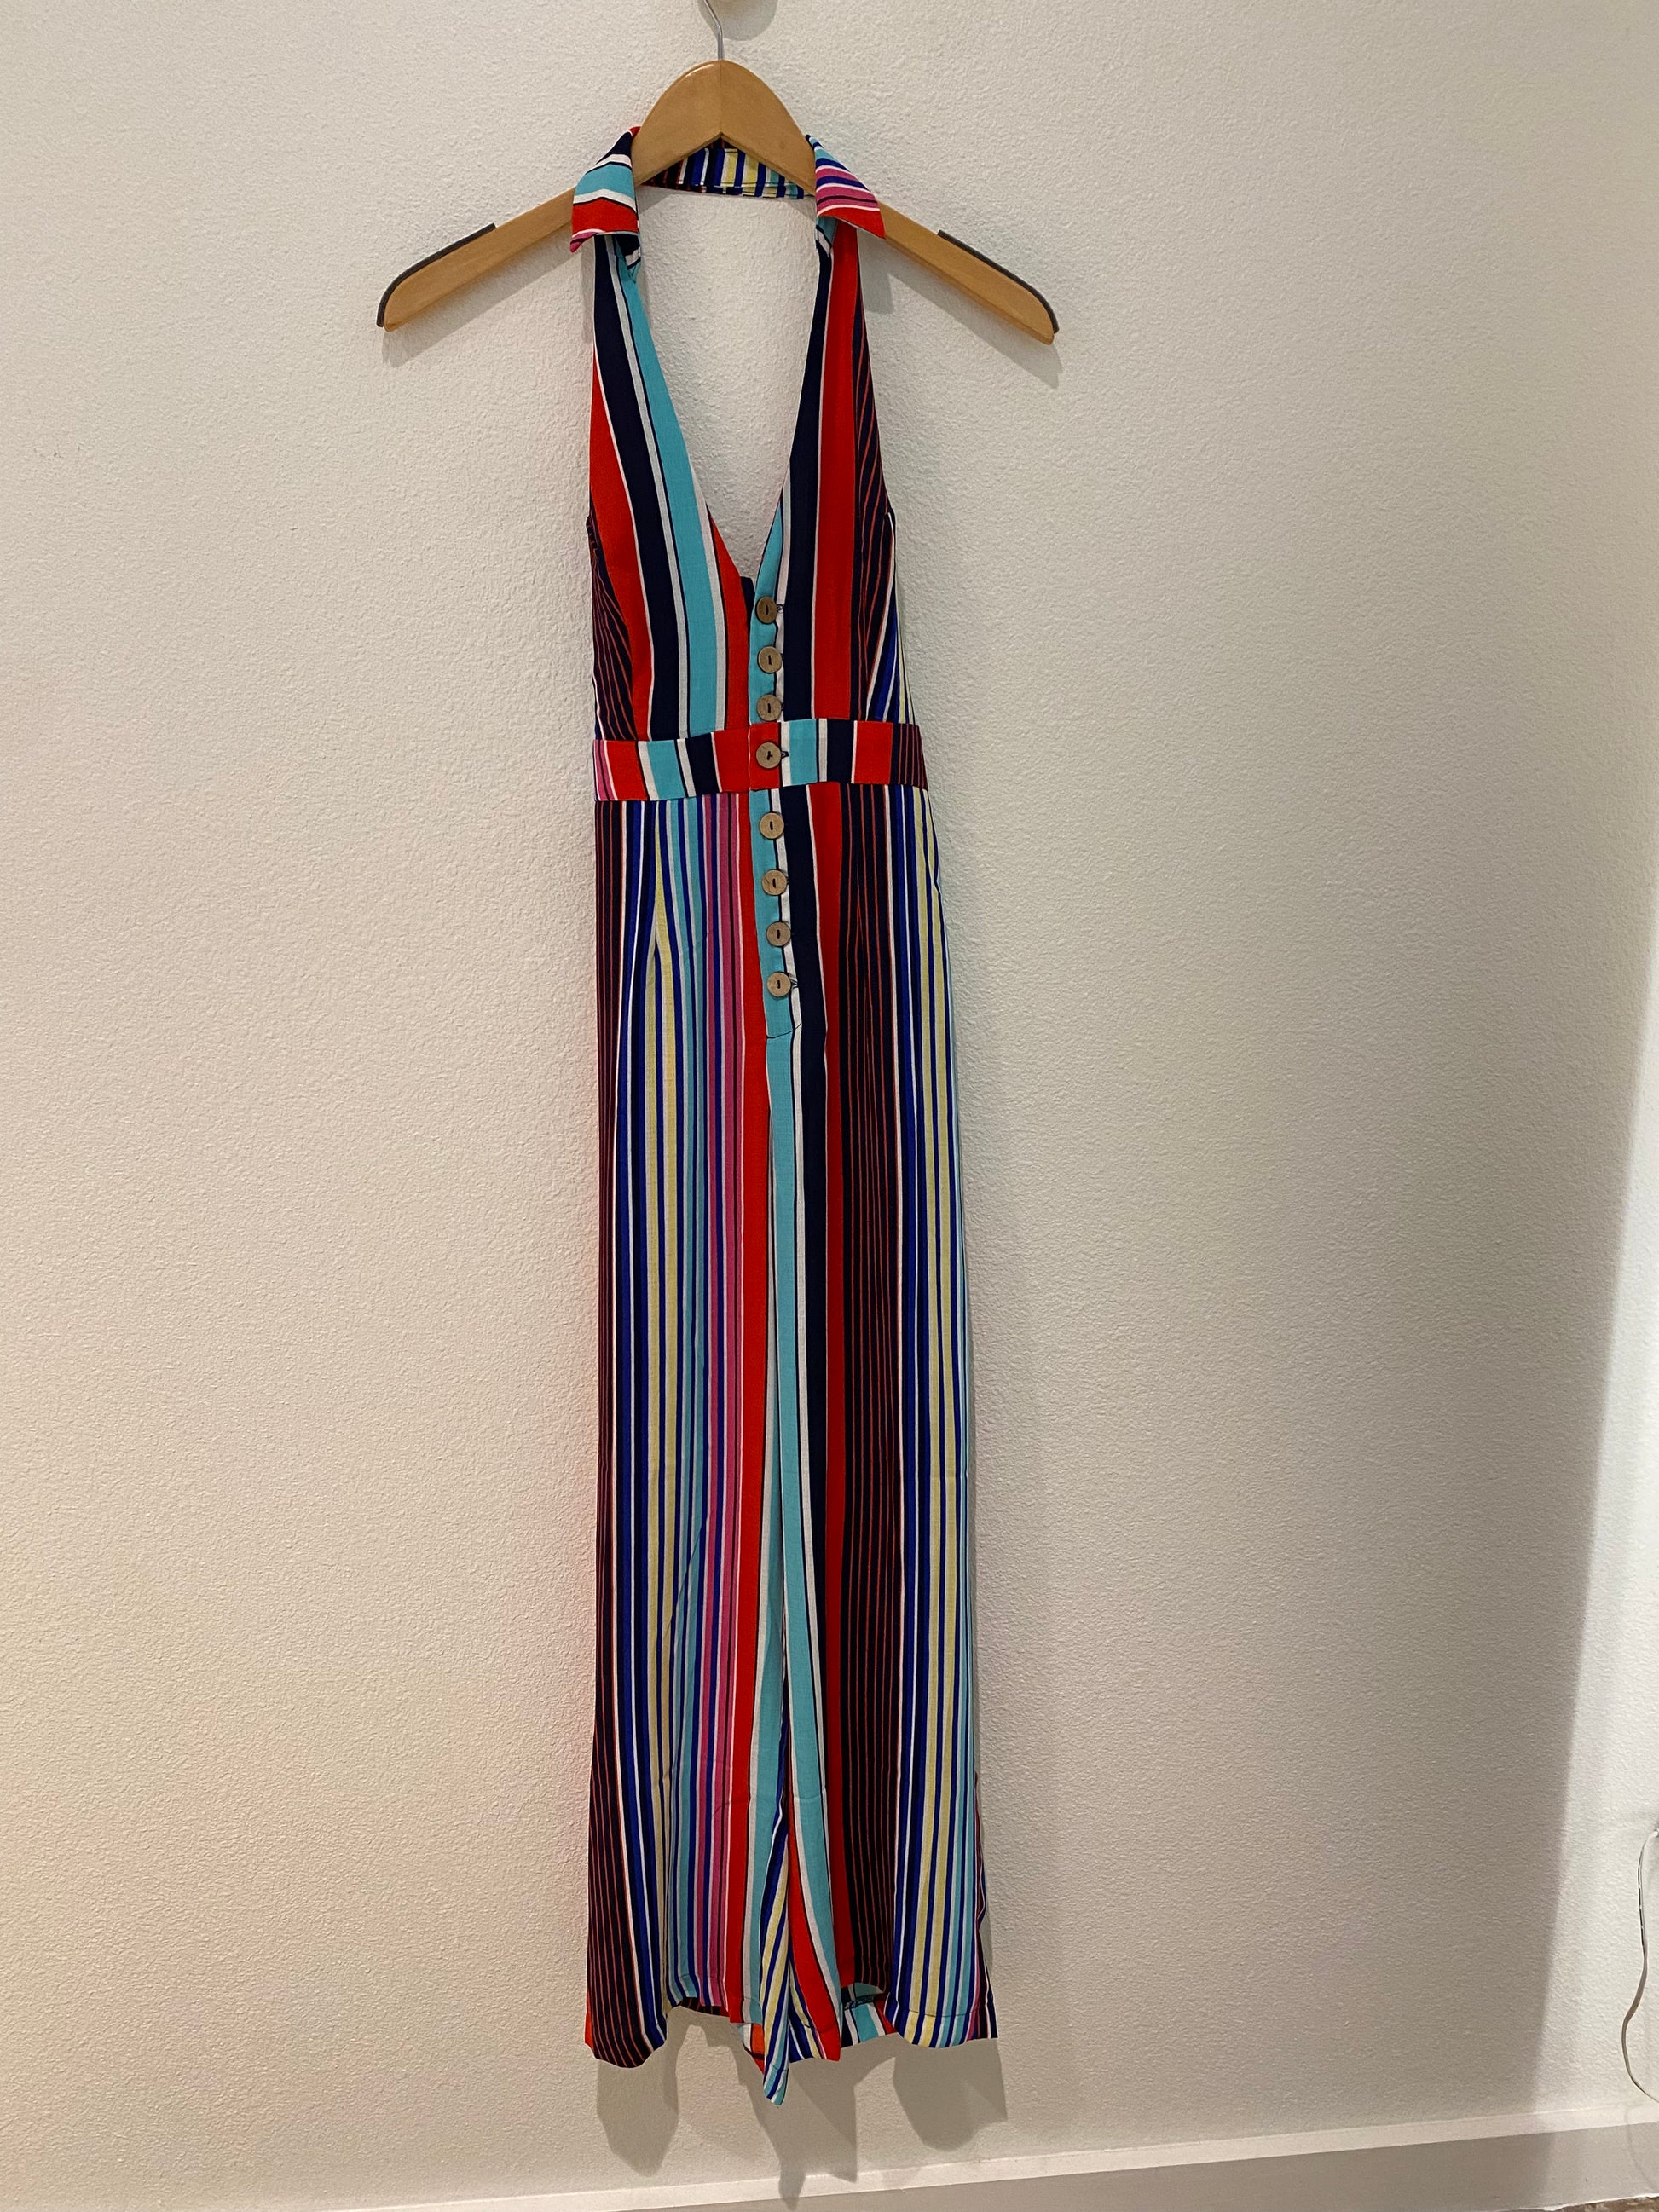 With its multicolored stripes and open back halter top